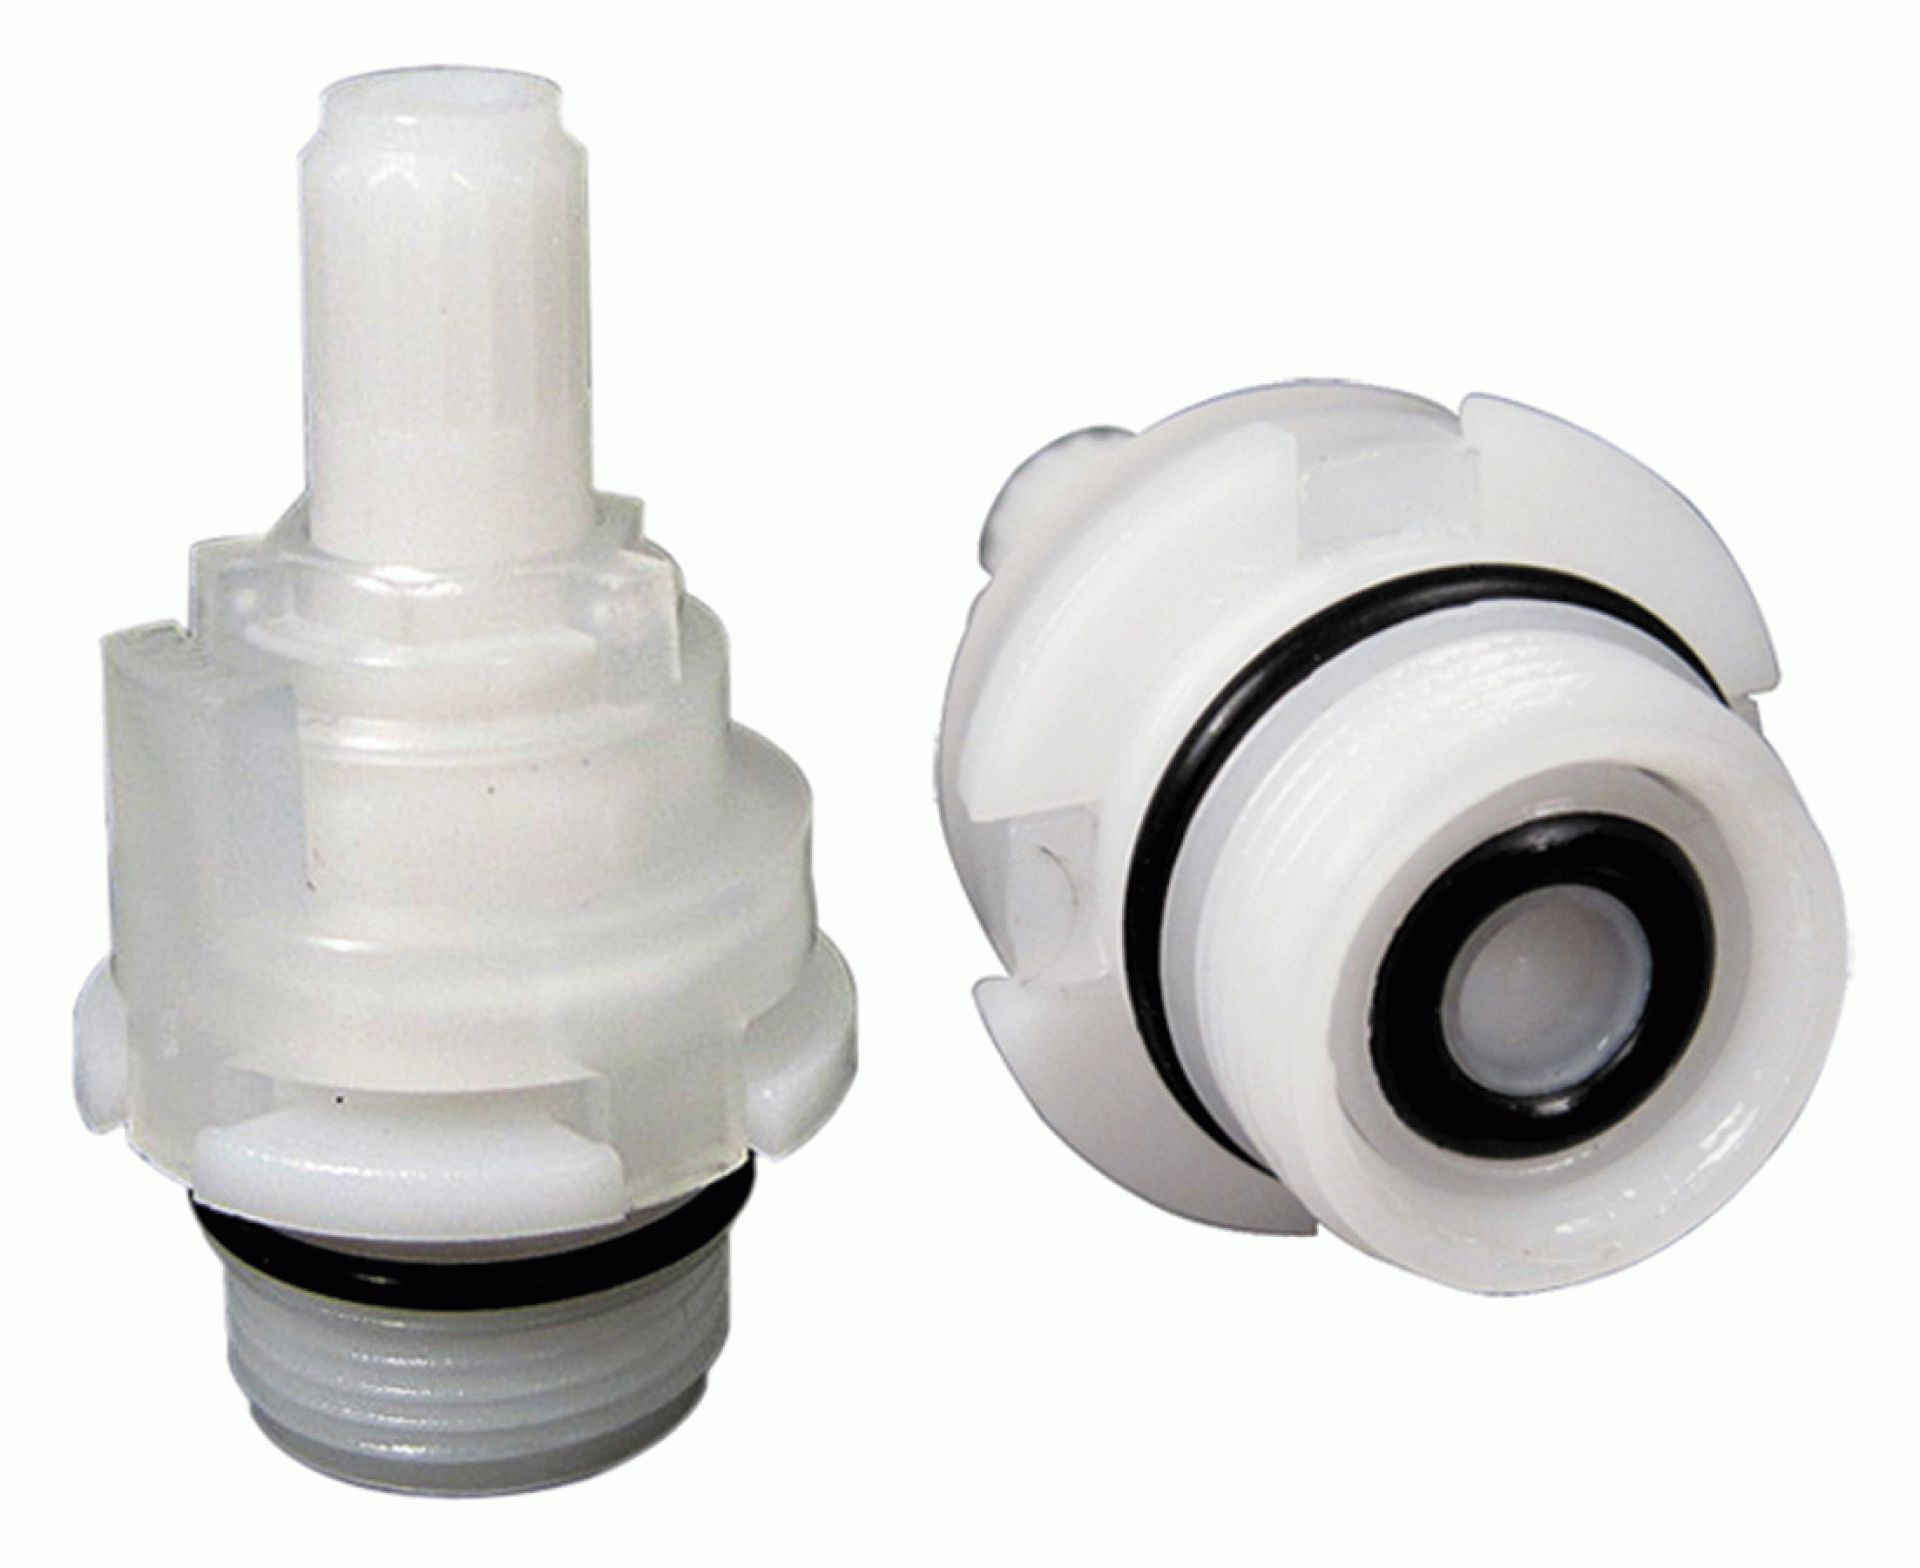 Phoenix Products | PF247006 | Washerless Faucet Stem And Bonnet Set Of 2